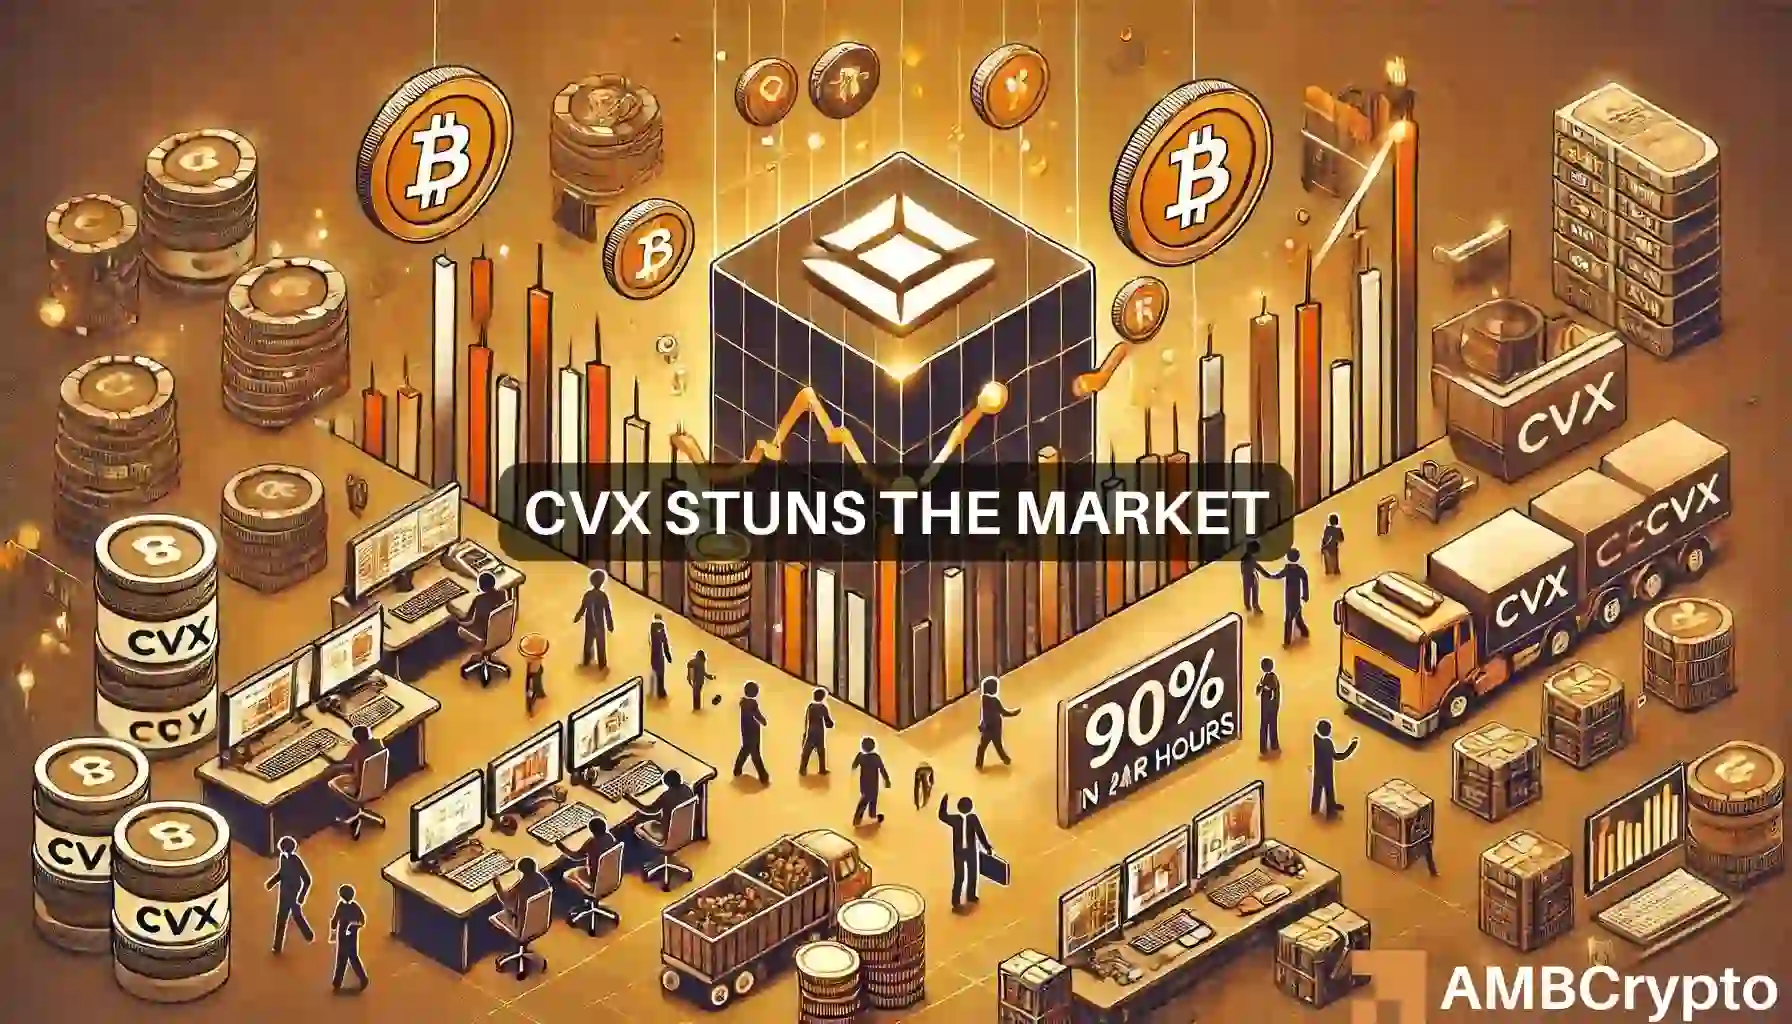 CVX crypto rallies +90%: Will the uptrend continue or is a correction looming?